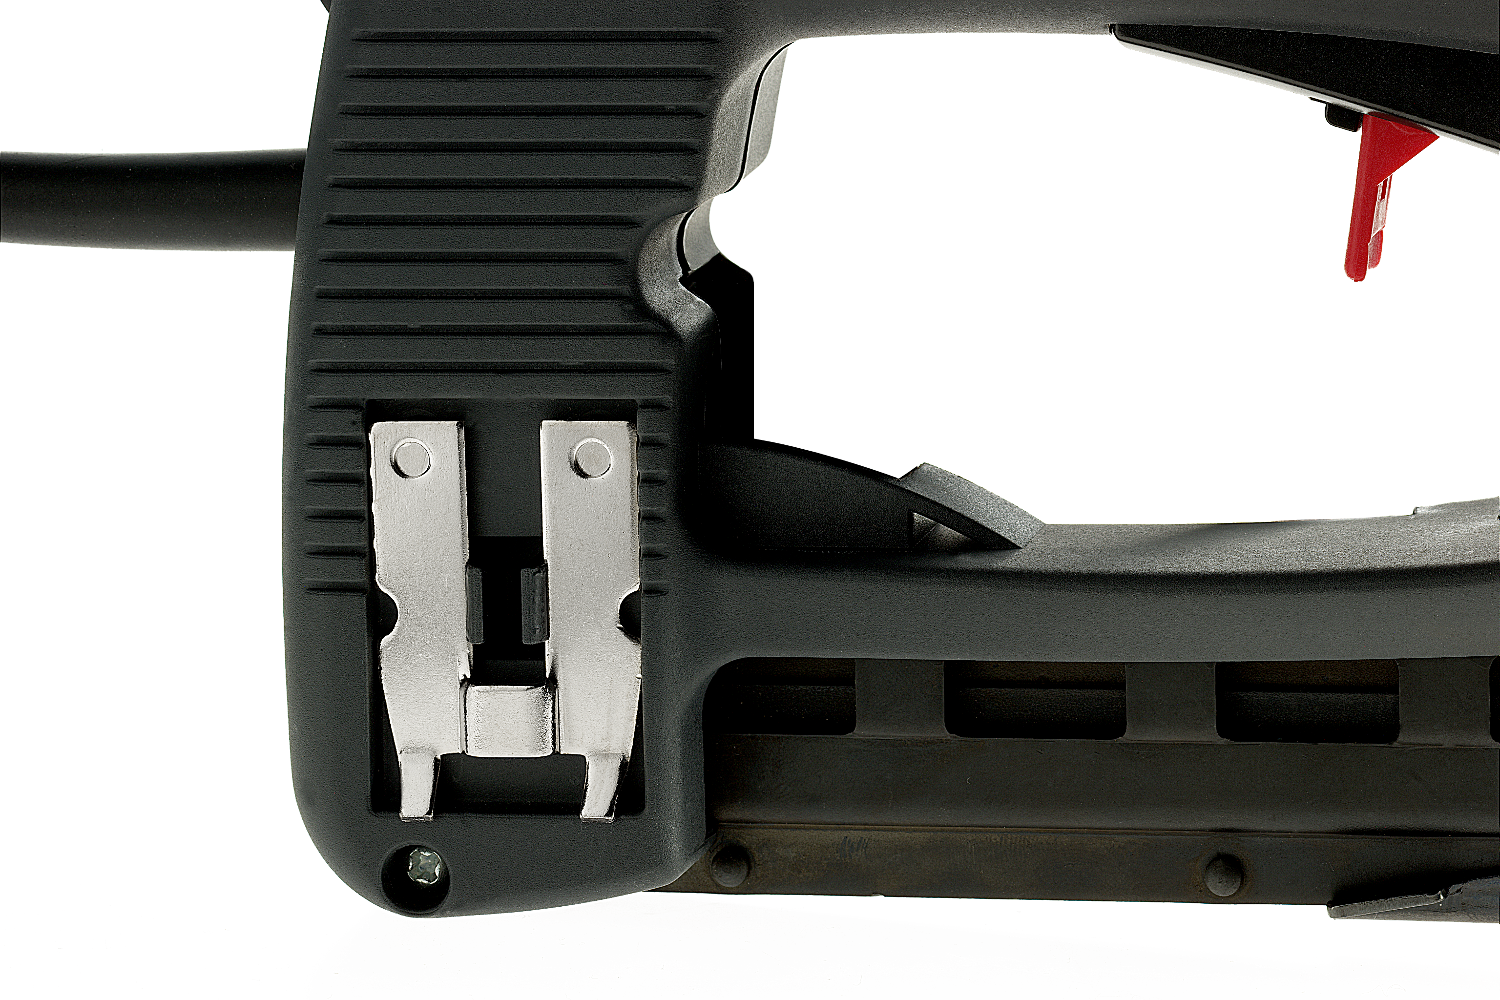 Panel clip guard acts as a guide when handling tongue-and-groove clips